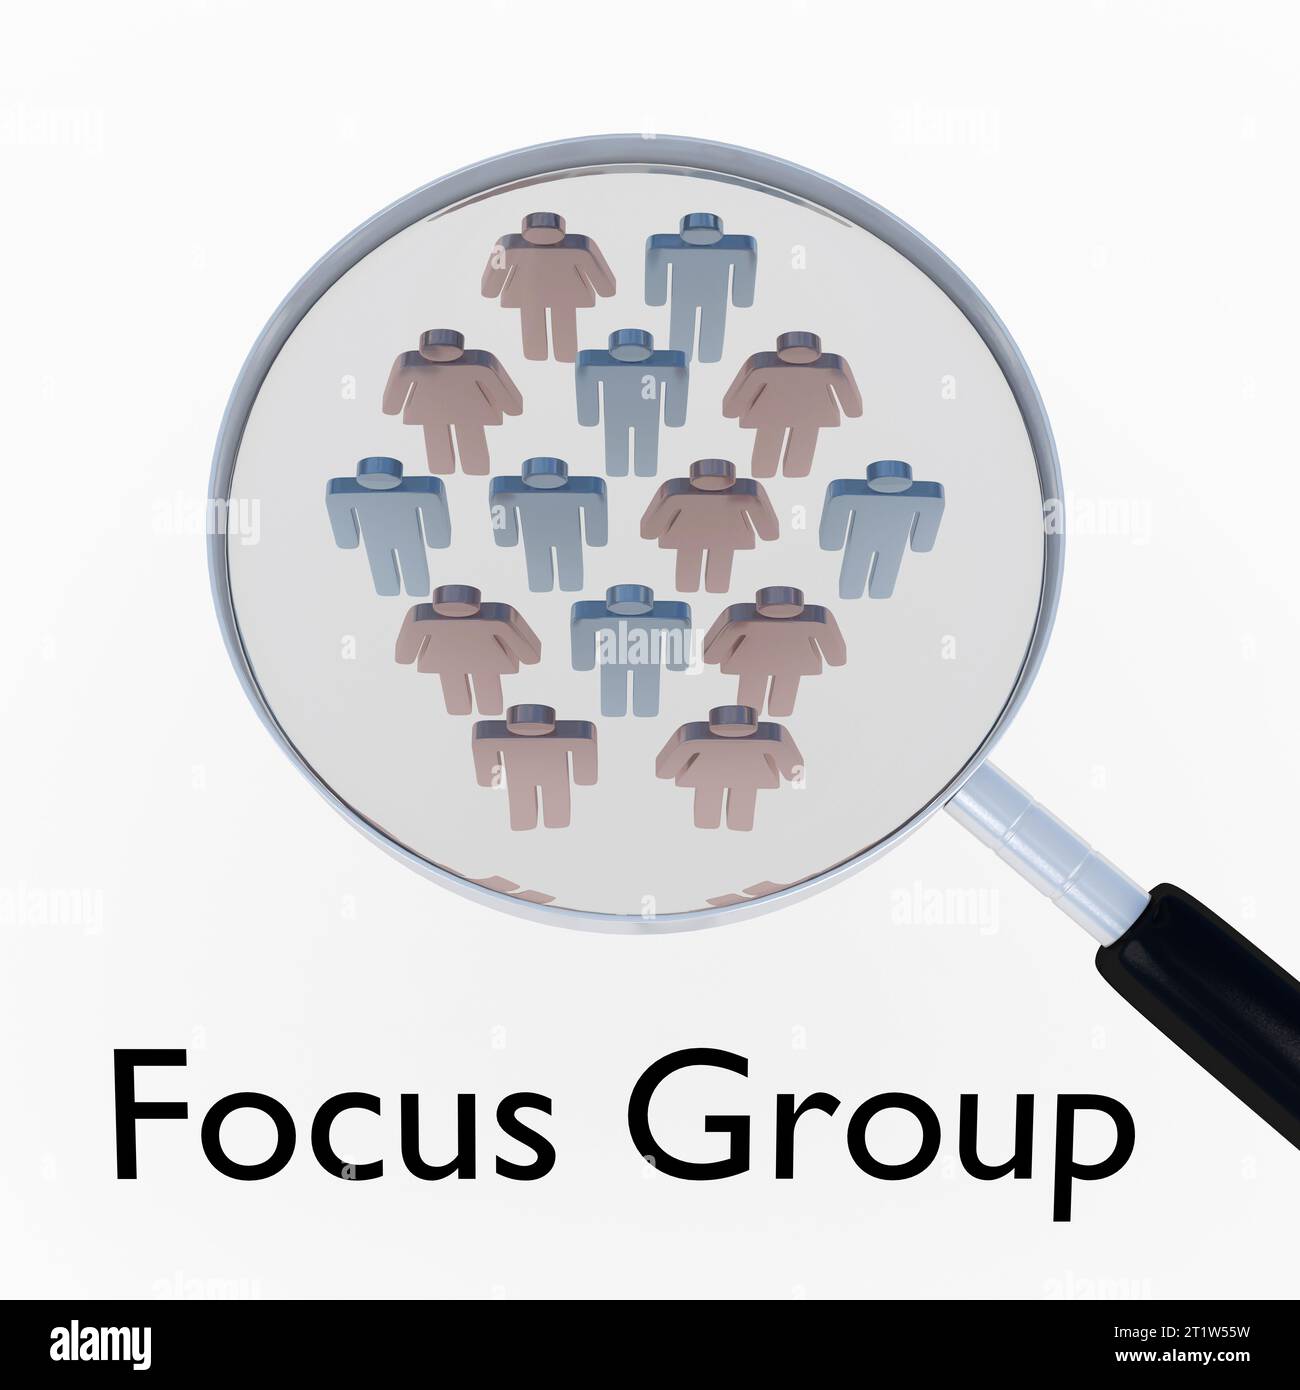 3D illustration of magnifying glass over women and men silhouettes, titled as Focus Group, isolated over gray. Stock Photo